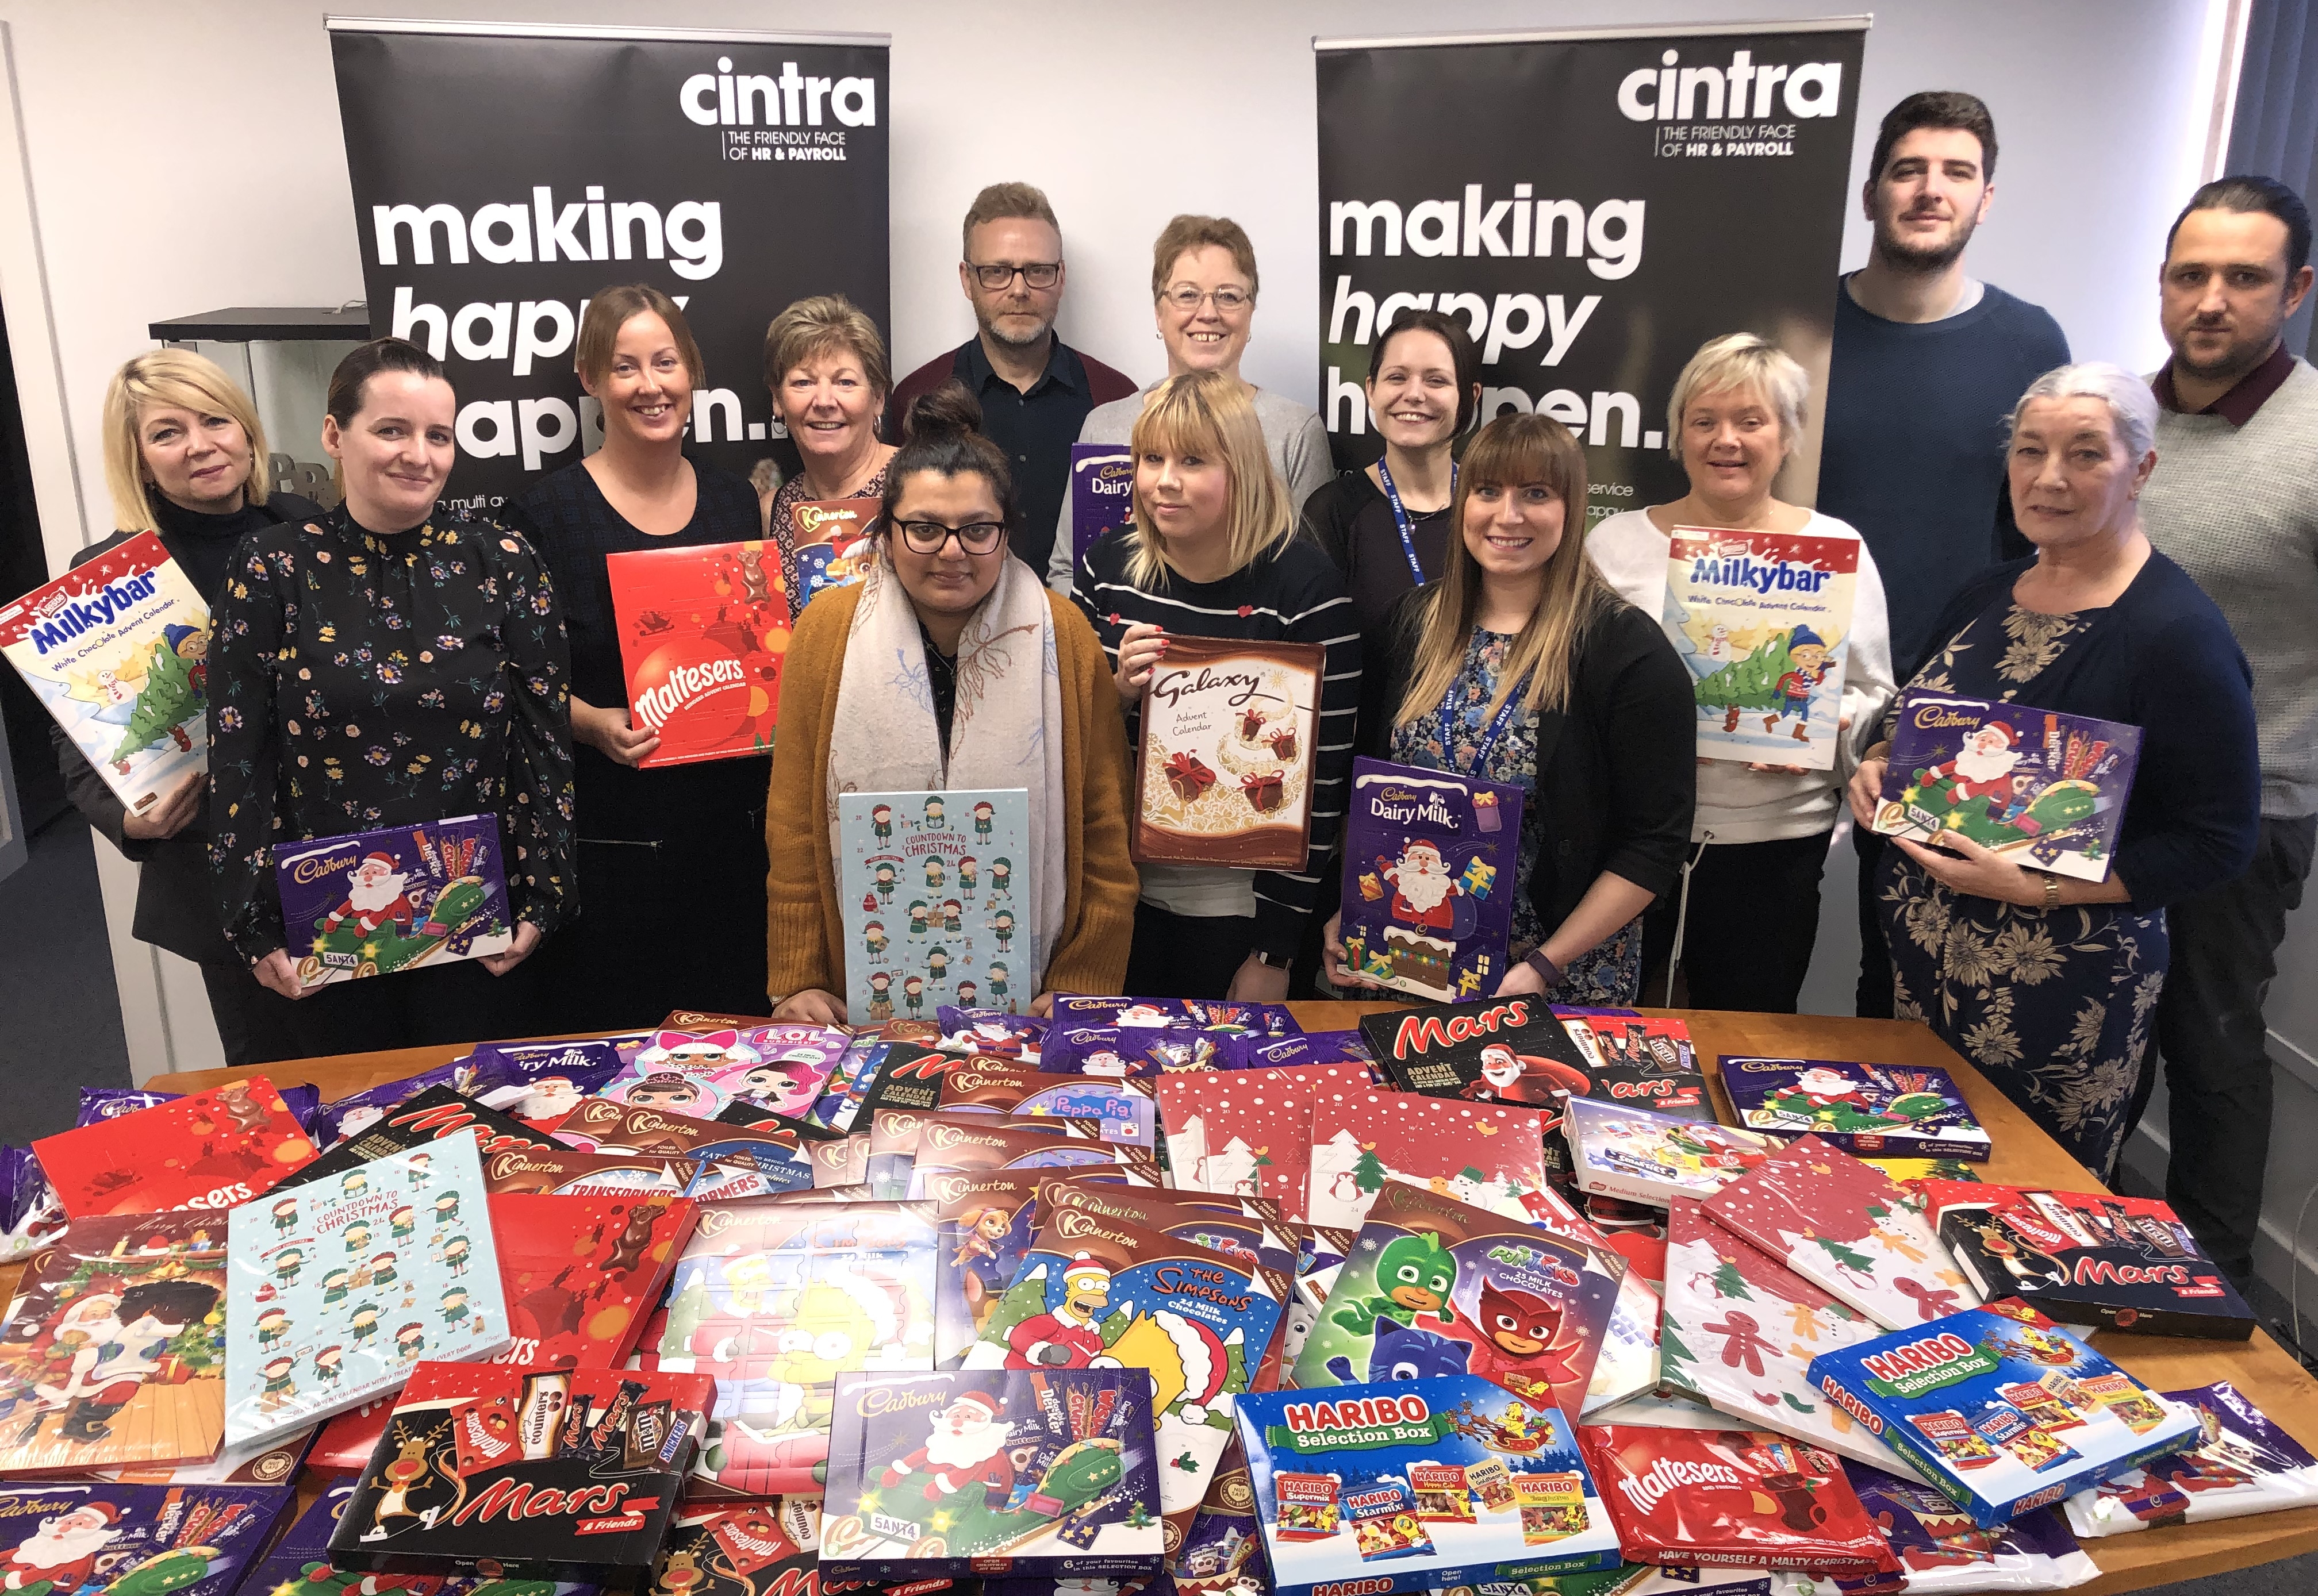 Cintra staff and the advent calendar collection